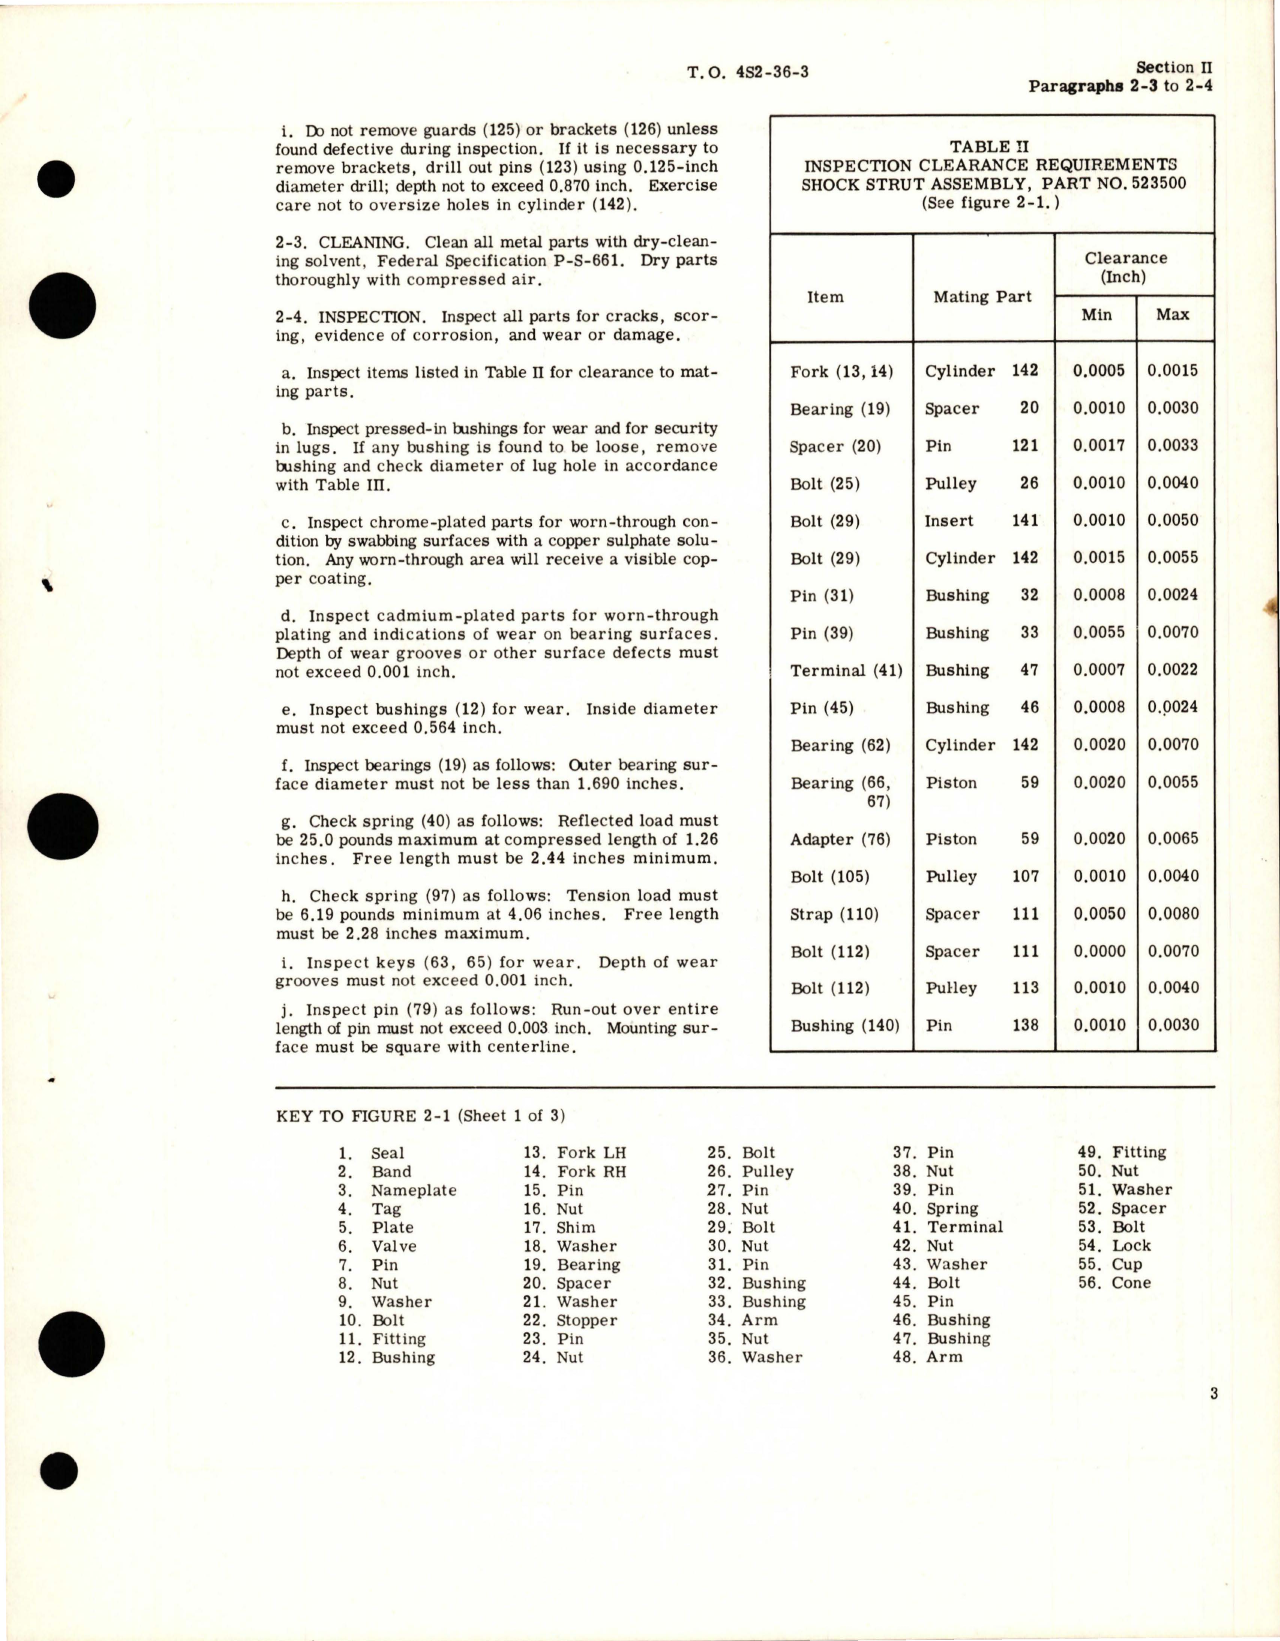 Sample page 7 from AirCorps Library document: Overhaul Instructions for Nose Landing Gear Shock Strut Assembly - Part 523500 